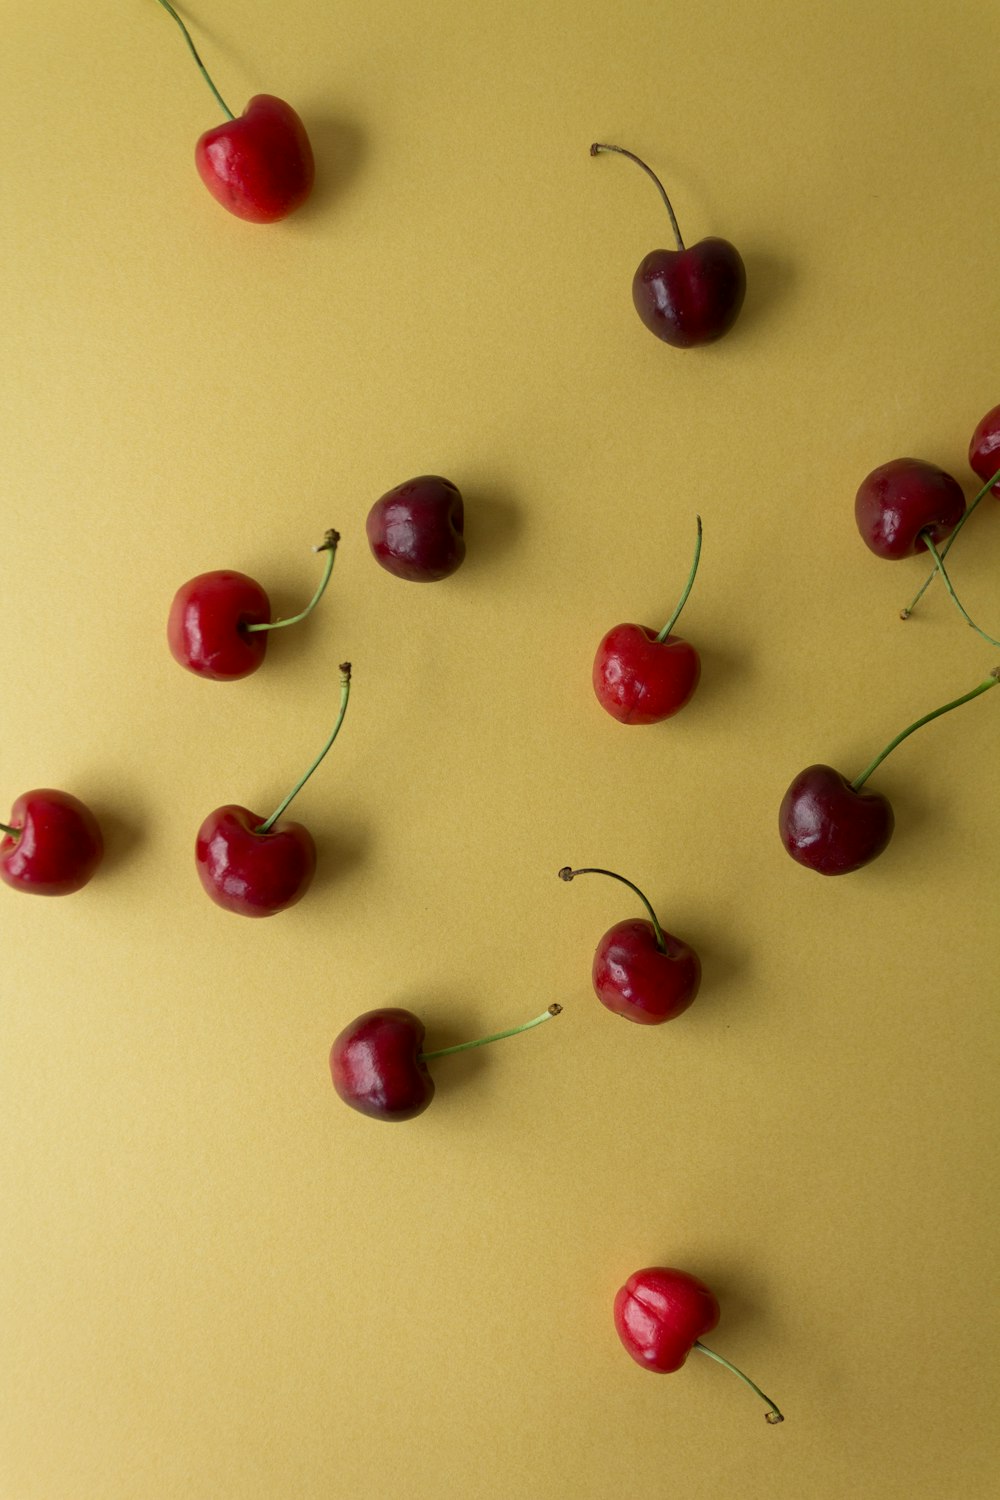 a group of cherries on a yellow surface